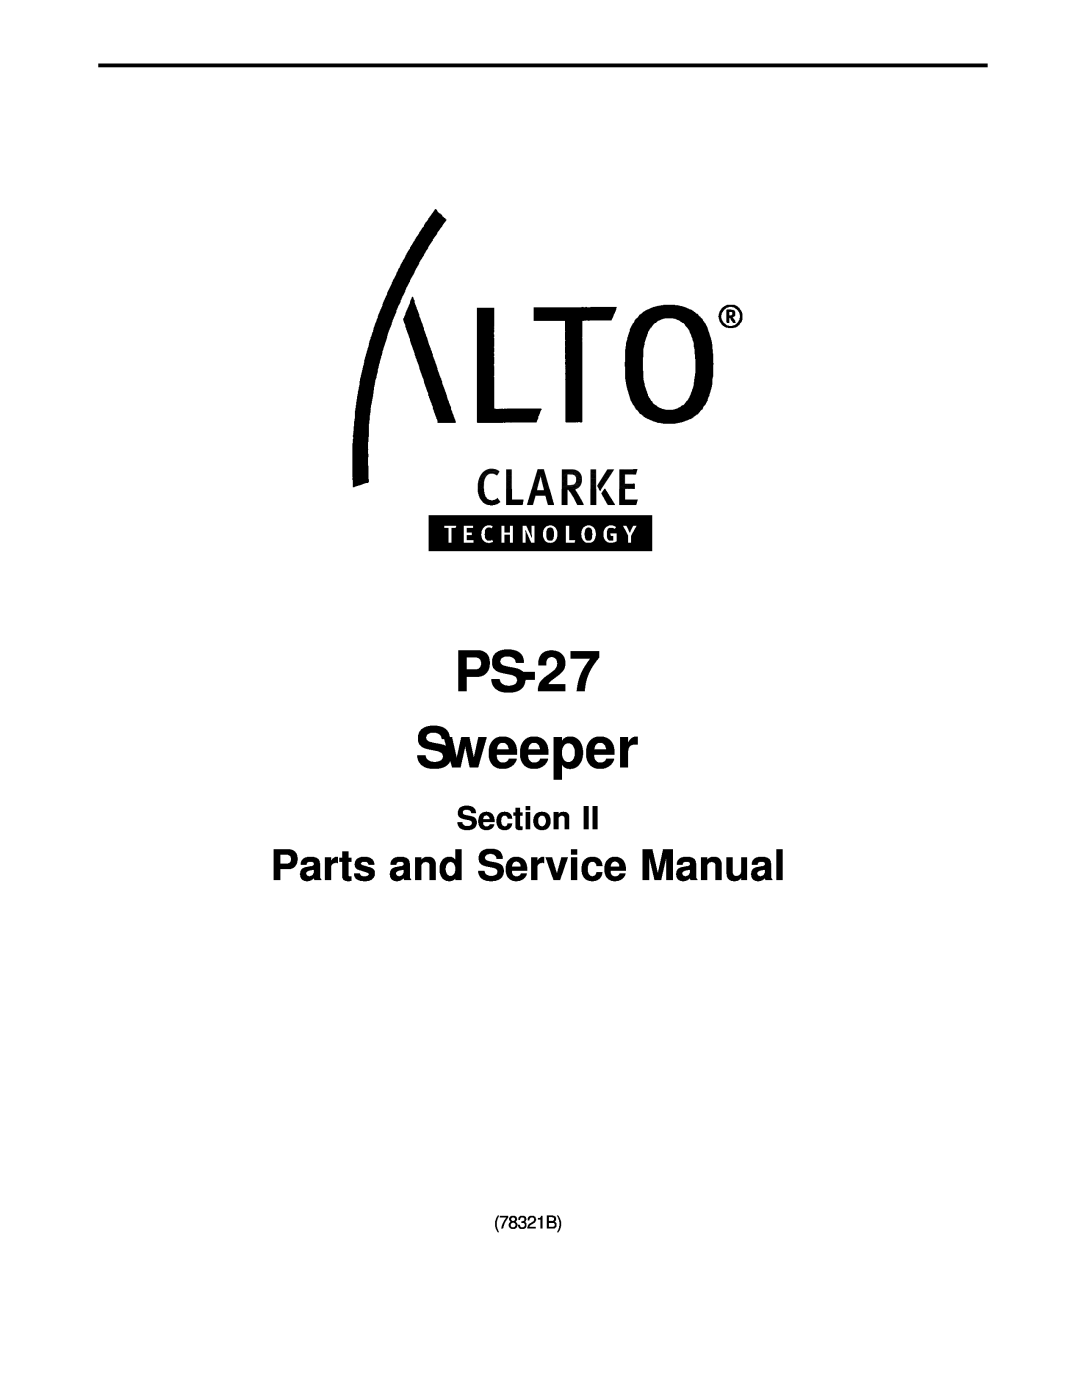 Nilfisk-ALTO Sweeper PS-27 manual PS-27 Sweeper, Section 